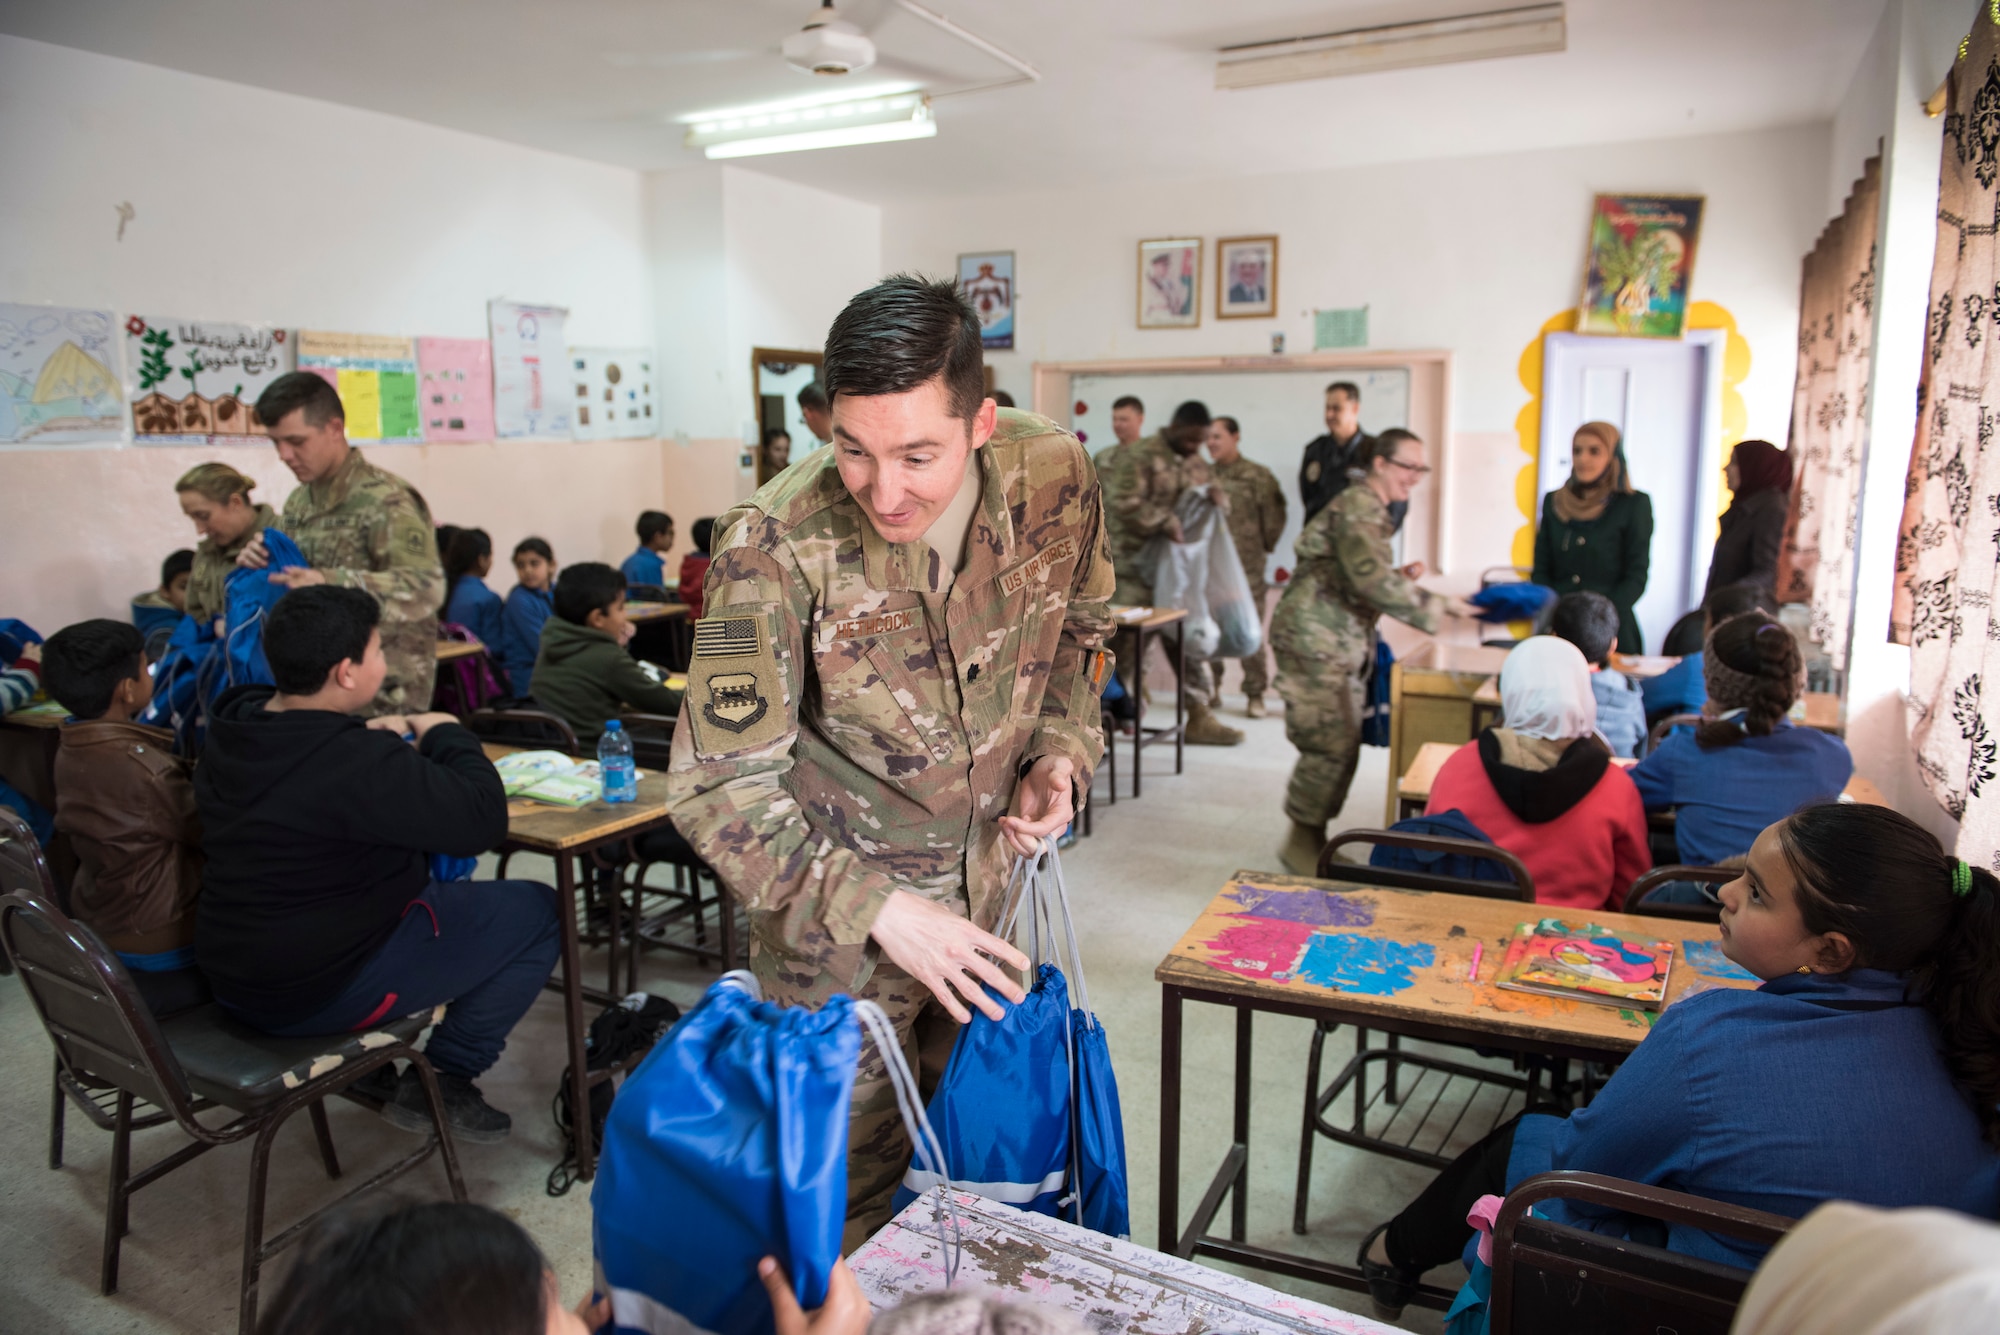 Lt. Col. Michael Hethcock, assigned to the 332d Air Expeditionary Wing, hands out bags filled with school supplies to children during a donation drop-off February 26, 2018, at an undisclosed location. The “Care for Kids” project served as an outlet for service members to make an impact in the local community while they’re in the region supporting Operation Inherent Resolve. (U.S. Air Force photo by Staff Sgt. Joshua Kleinholz)